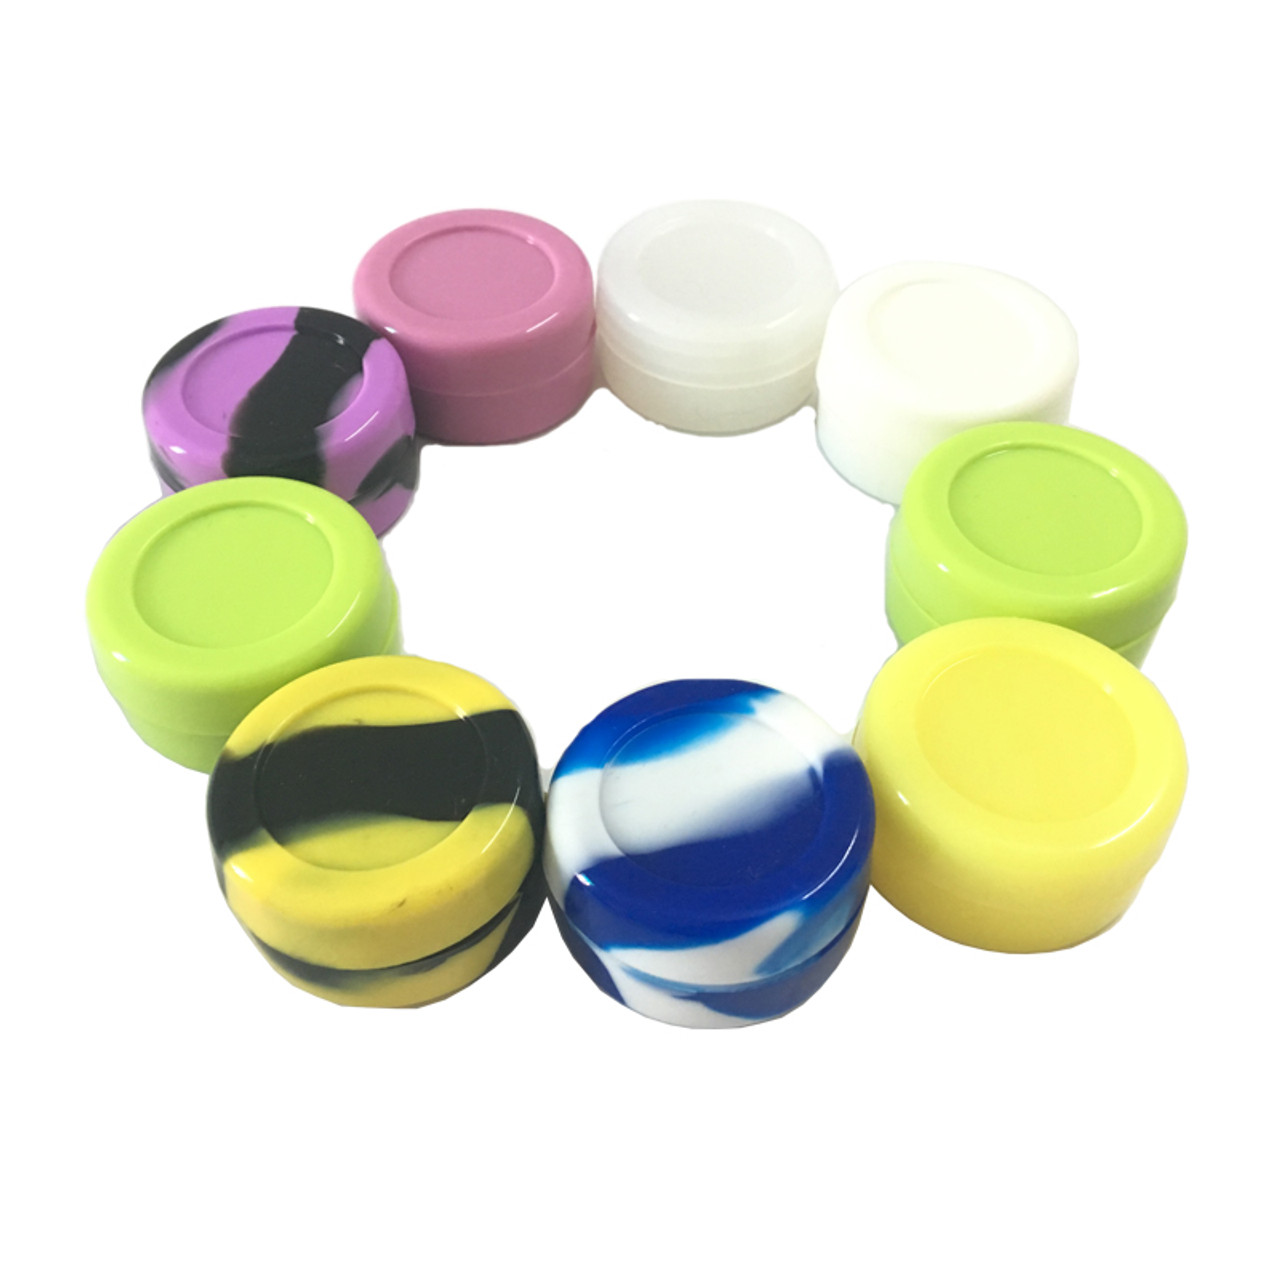 7 mL Silicone Puck Container